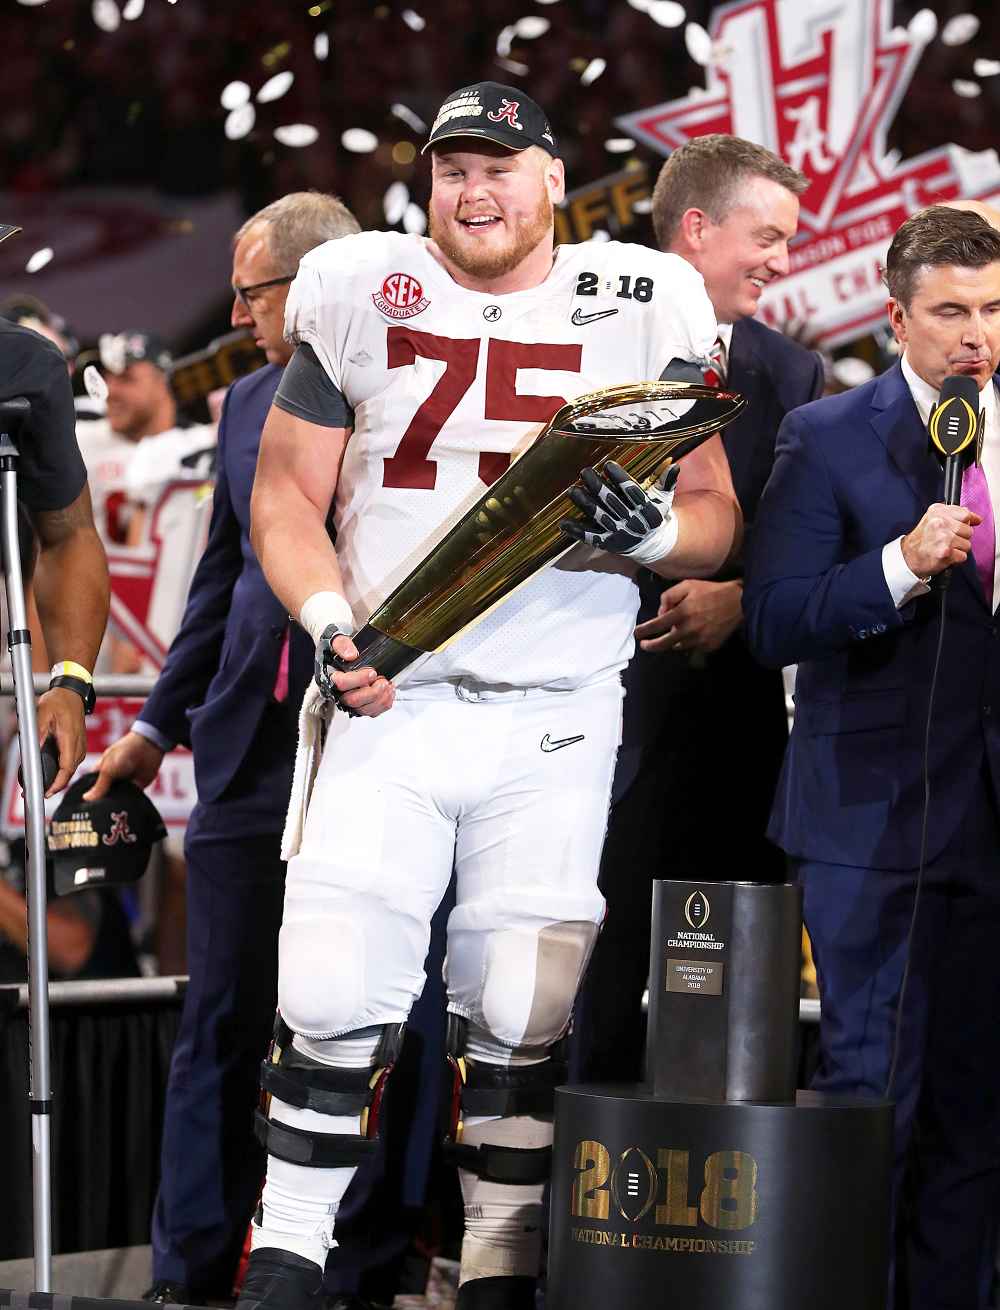 Bradley Bozeman #75 of the Alabama Crimson Tide holds the trophy while celebrating with his team after defeating the Georgia Bulldogs in overtime to win the CFP National Championship presented by AT&T at Mercedes-Benz Stadium on January 8, 2018 in Atlanta, Georgia.